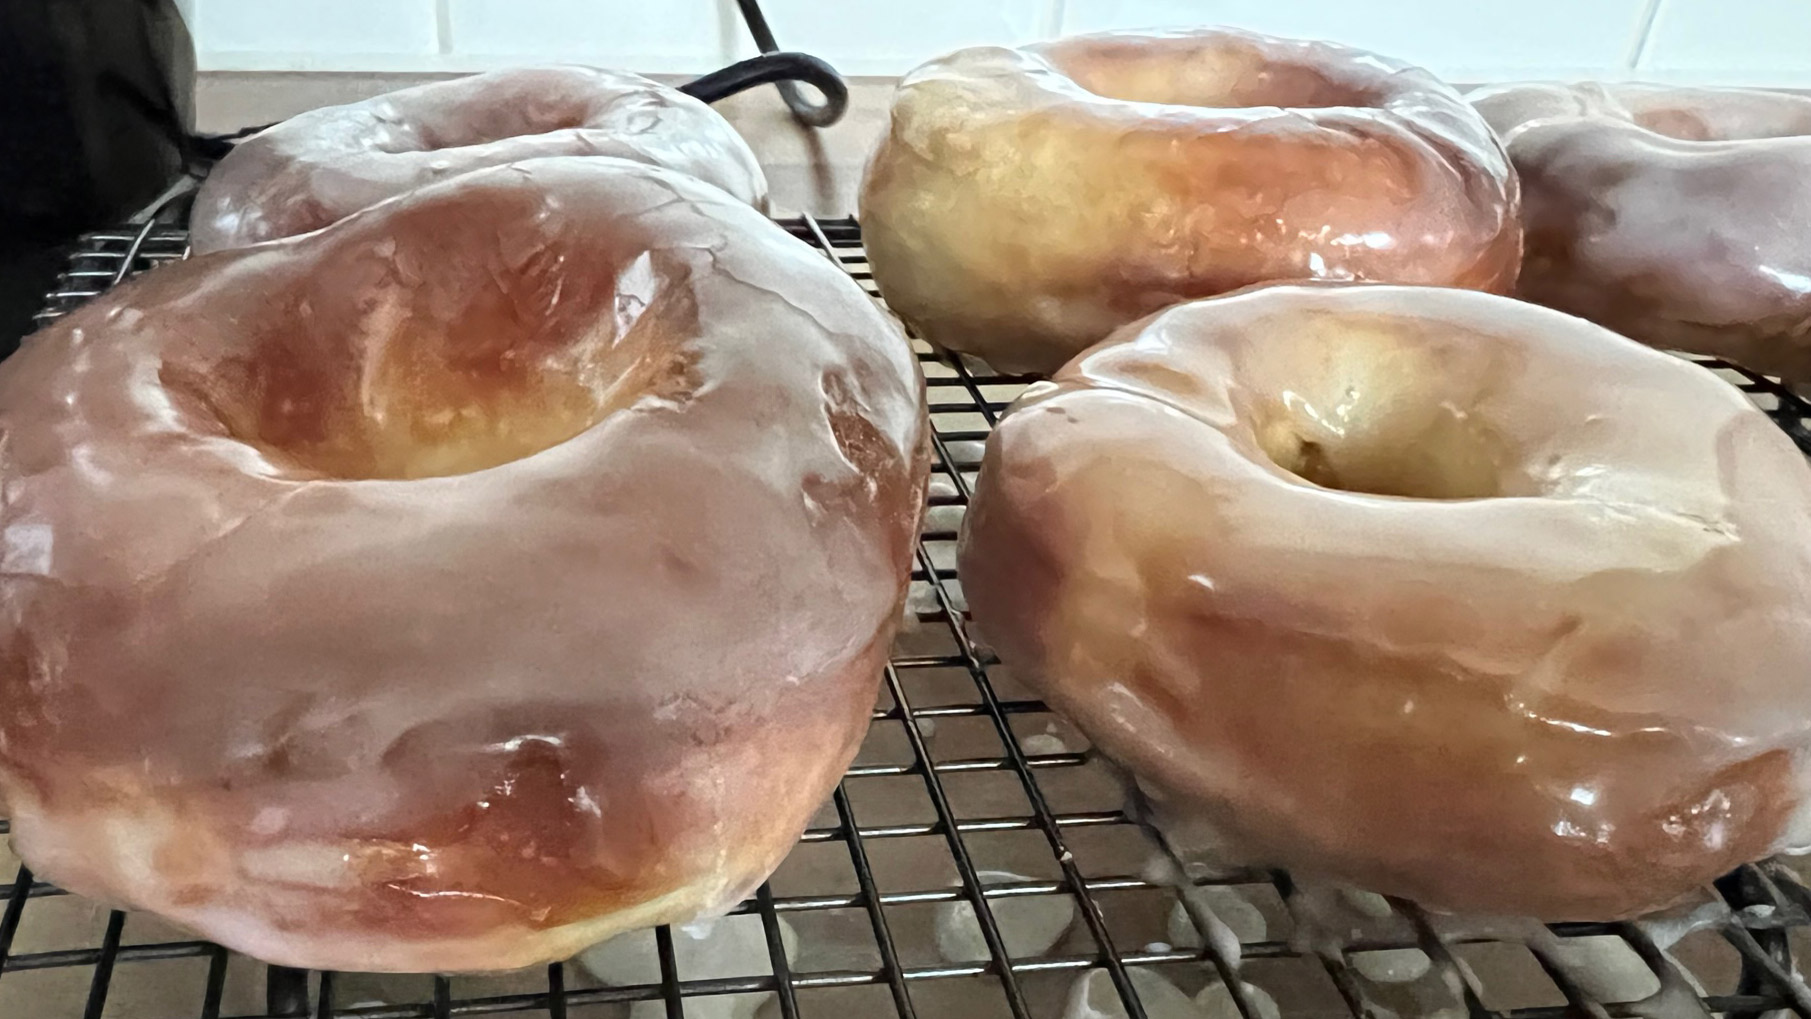 Close-up of glazed donuts for a deep fryer